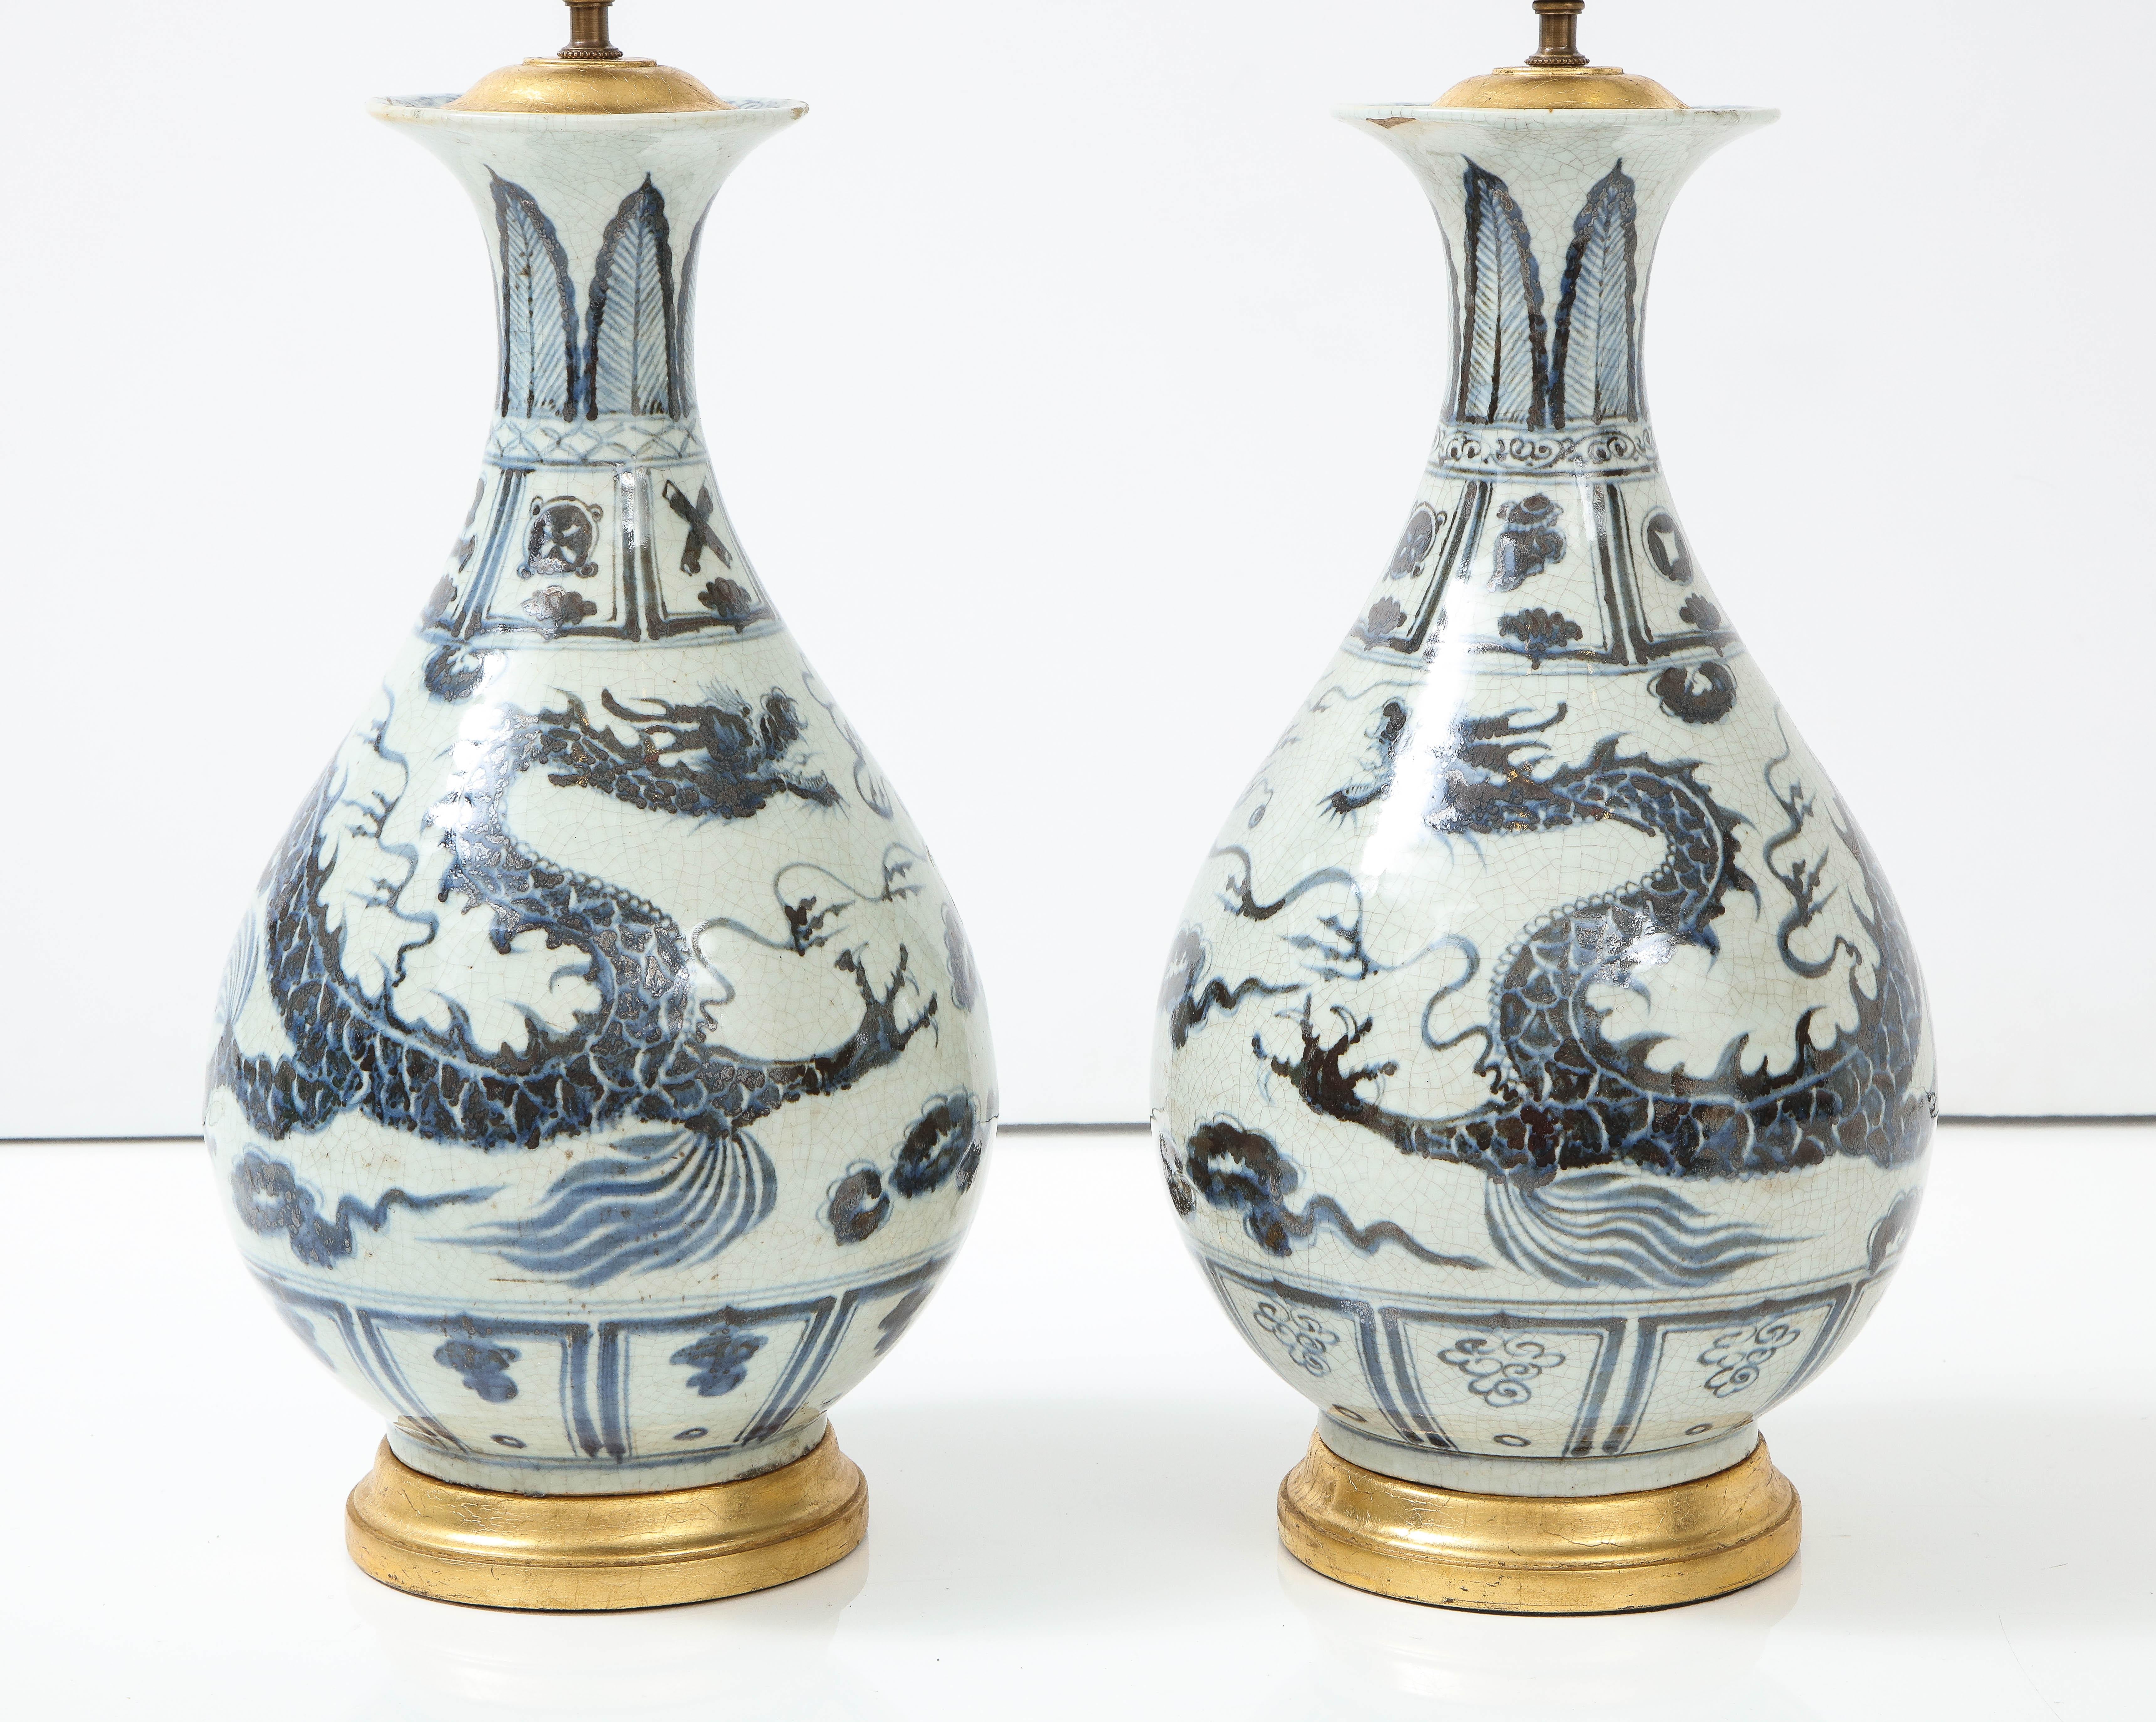 A pair of blue and white Chinese export porcelain lamps in a graceful urn shape mounted on a gilt base. Depicting a dragon motif design, these lamps almost read neutral and can been with any decor, modern or traditional.